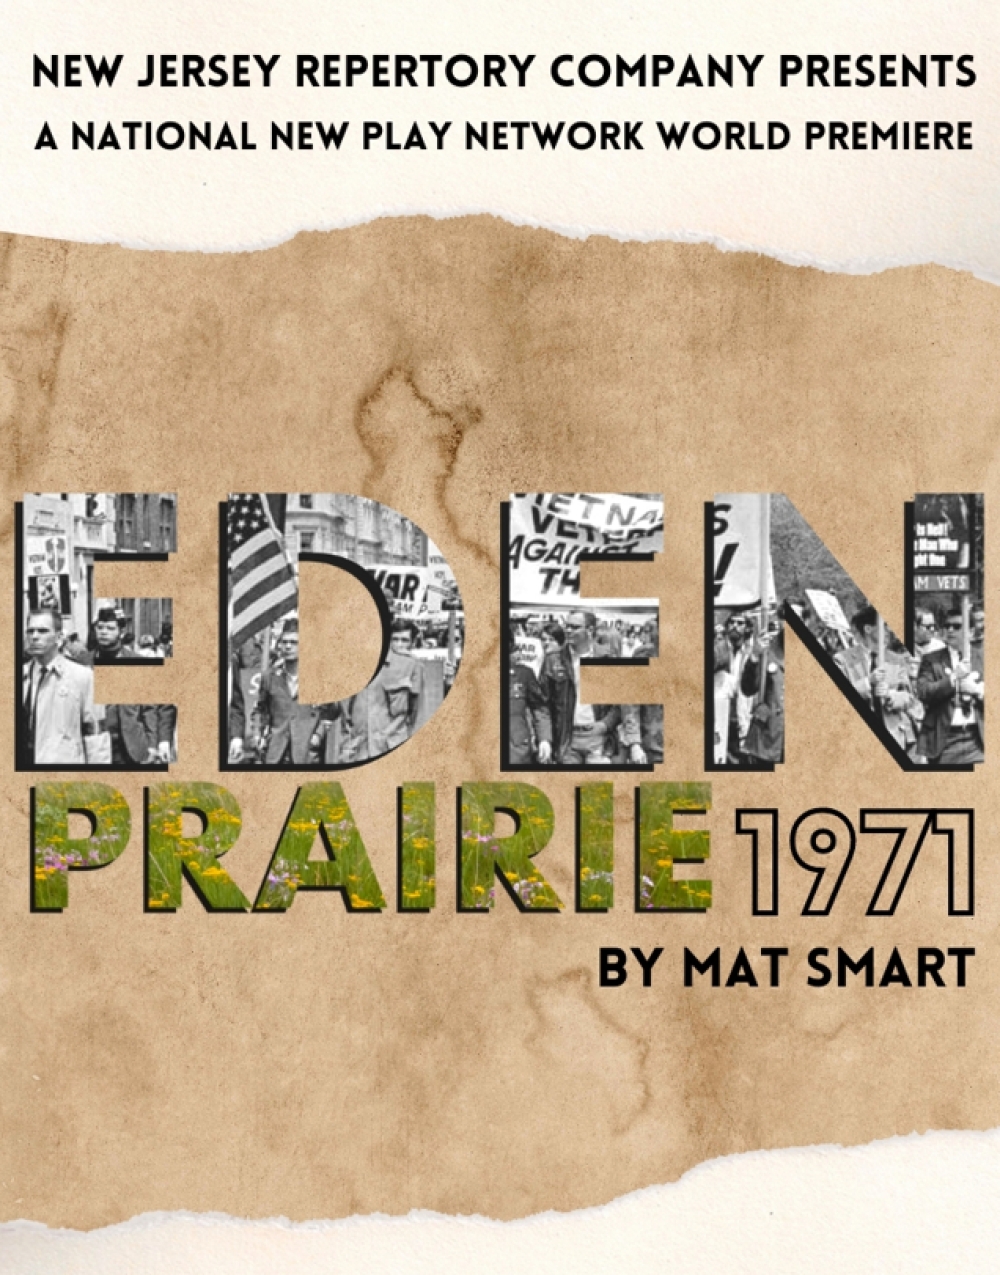 Eden Prairie, 1971 - New Jersey Repertory Company Stage Mag